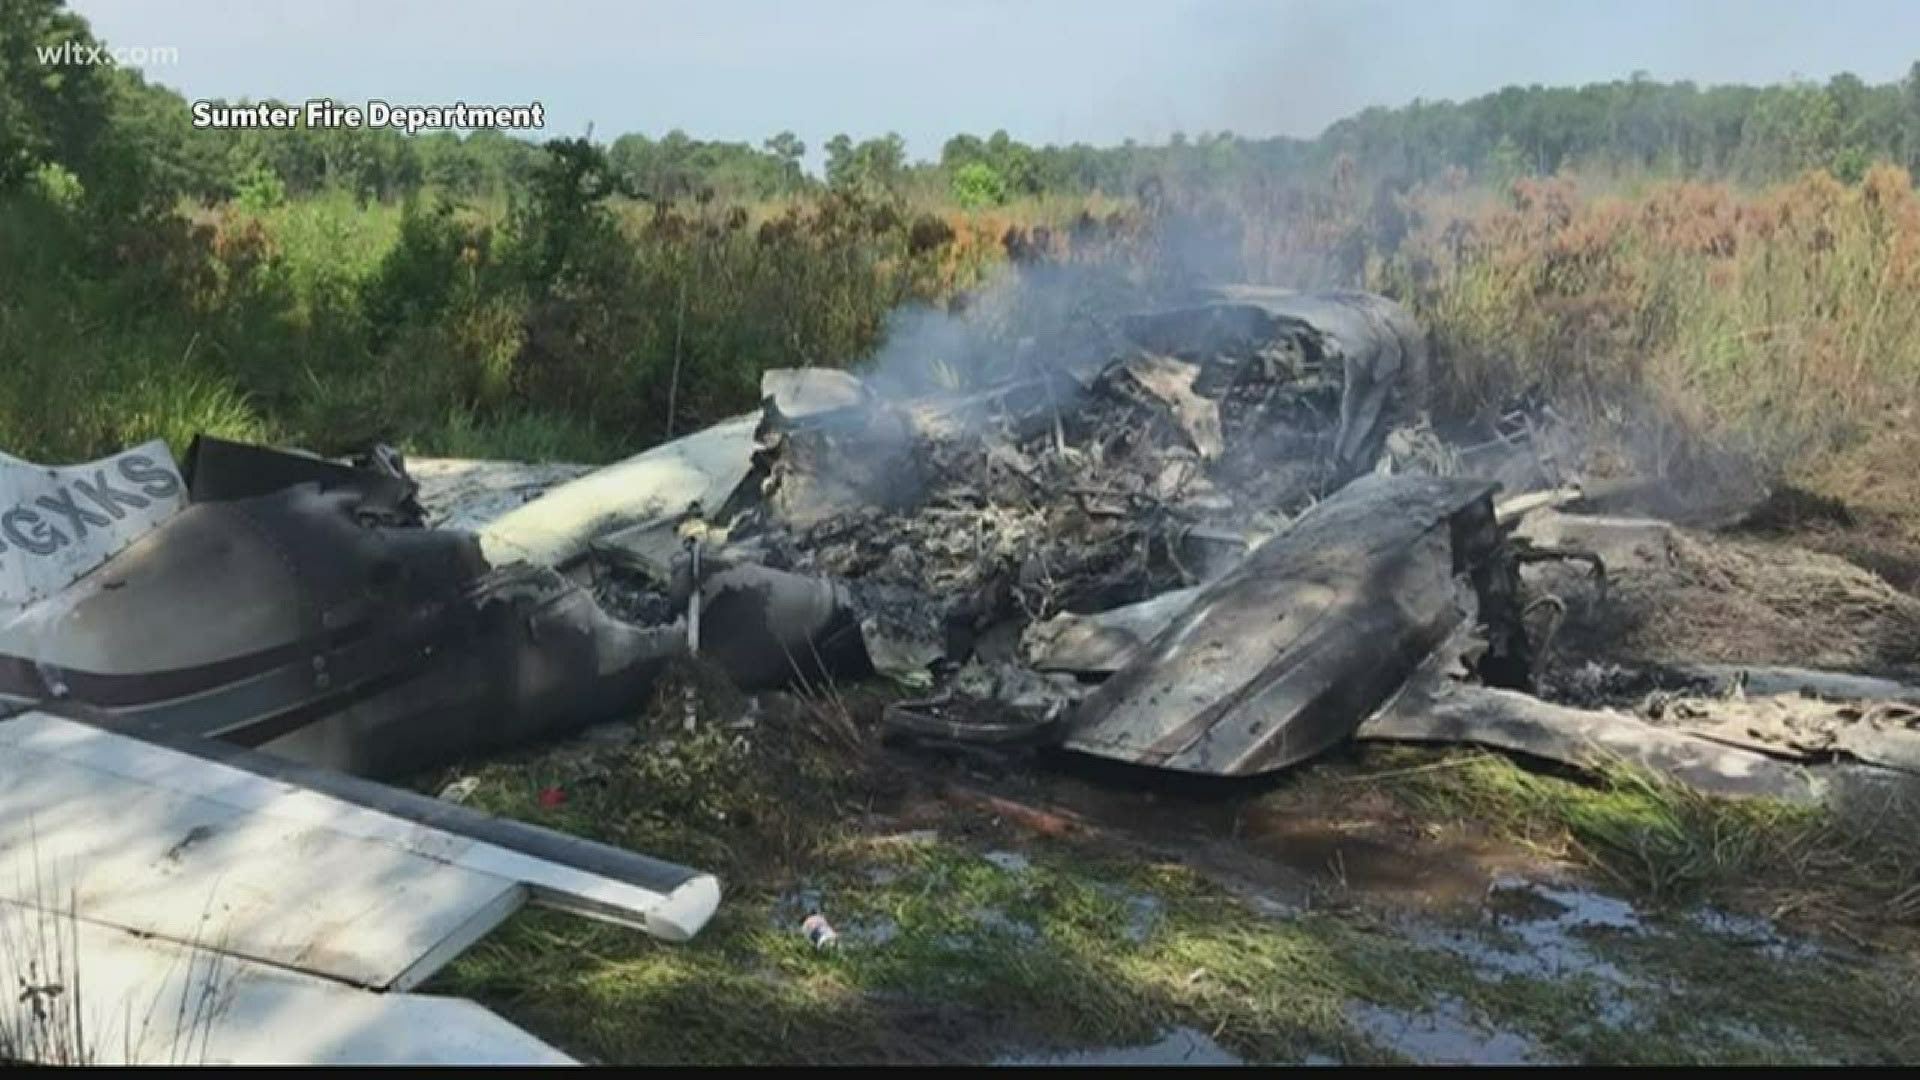 The Sumter Fire Department responded to a small plane crash Saturday morning.